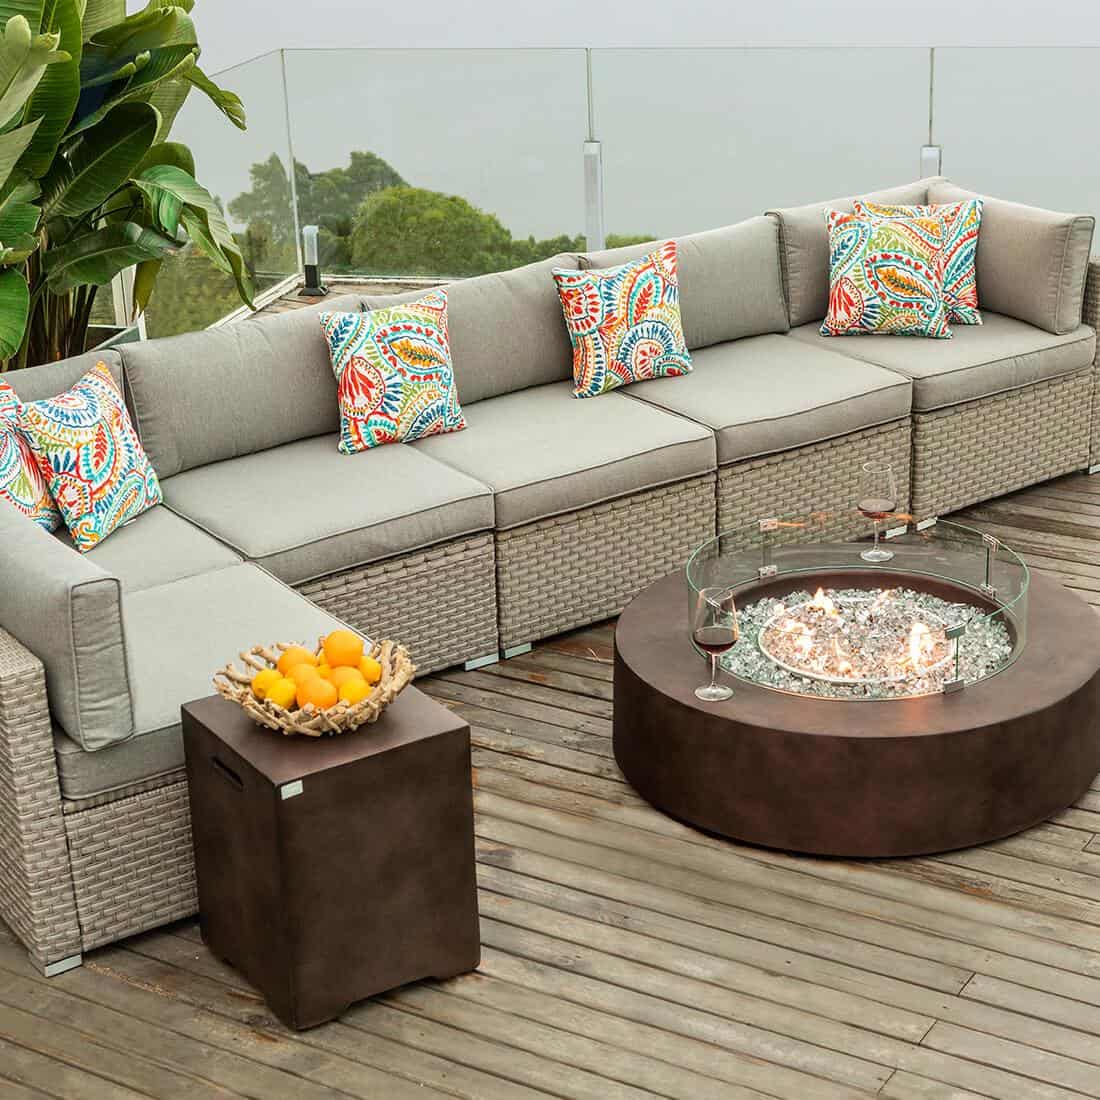 Maui 8 Piece L Shaped Patio Sofa with Round Fire Pit